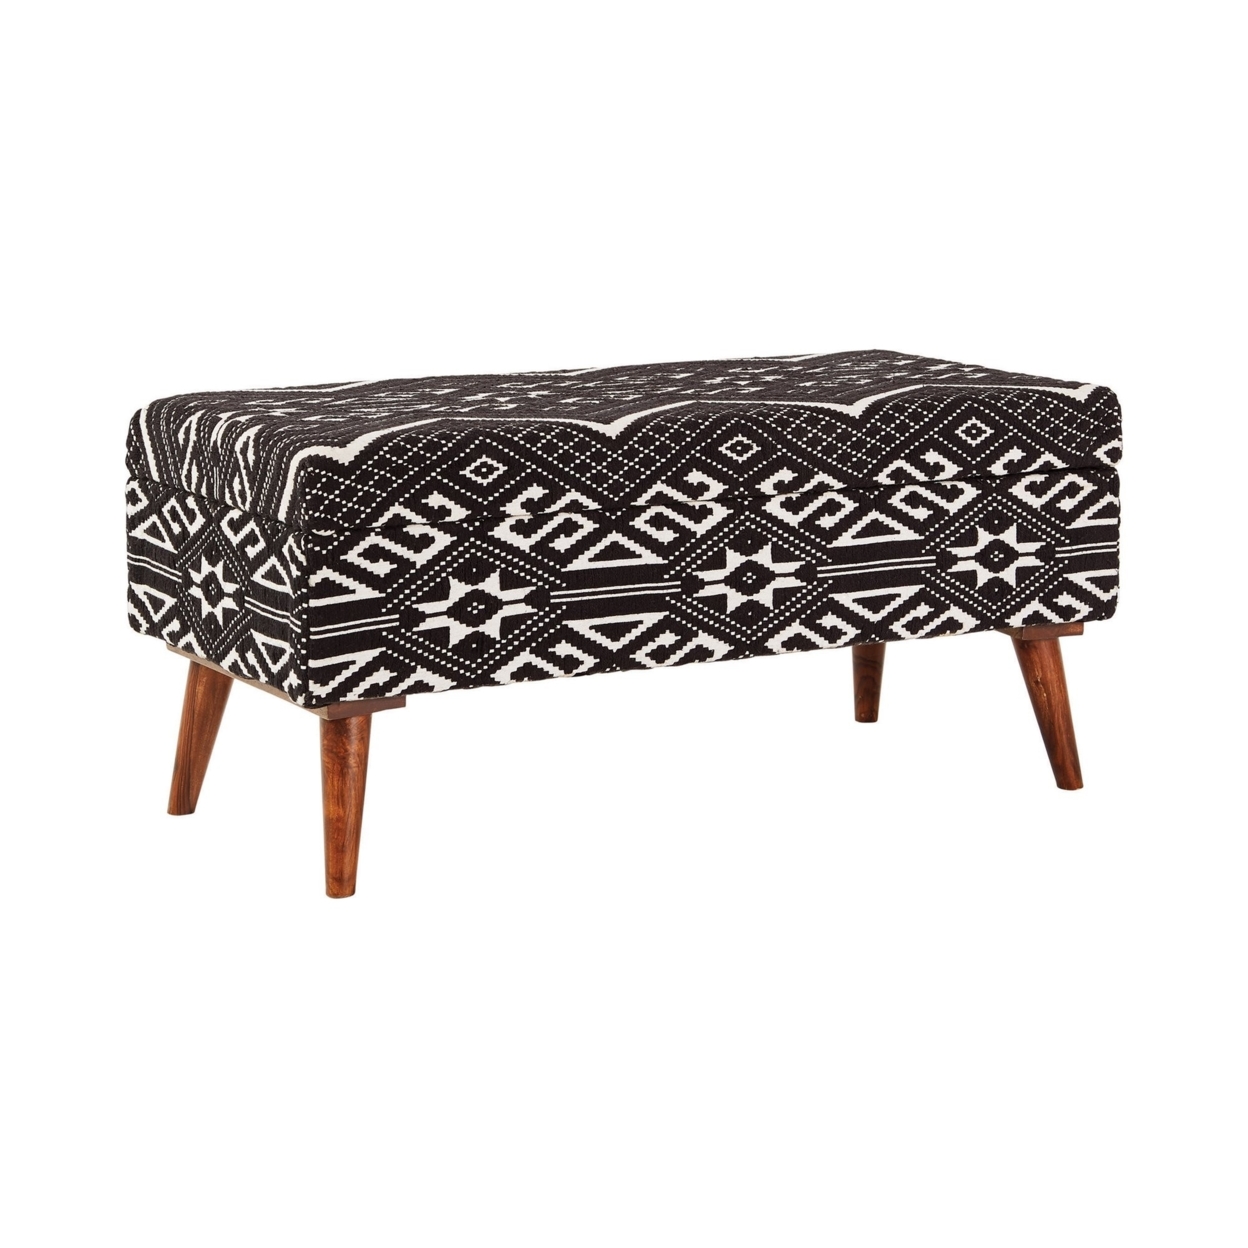 Ben 36 Inch Bench, Cushioned Pattern Seat, Woven Cotton, Black, White